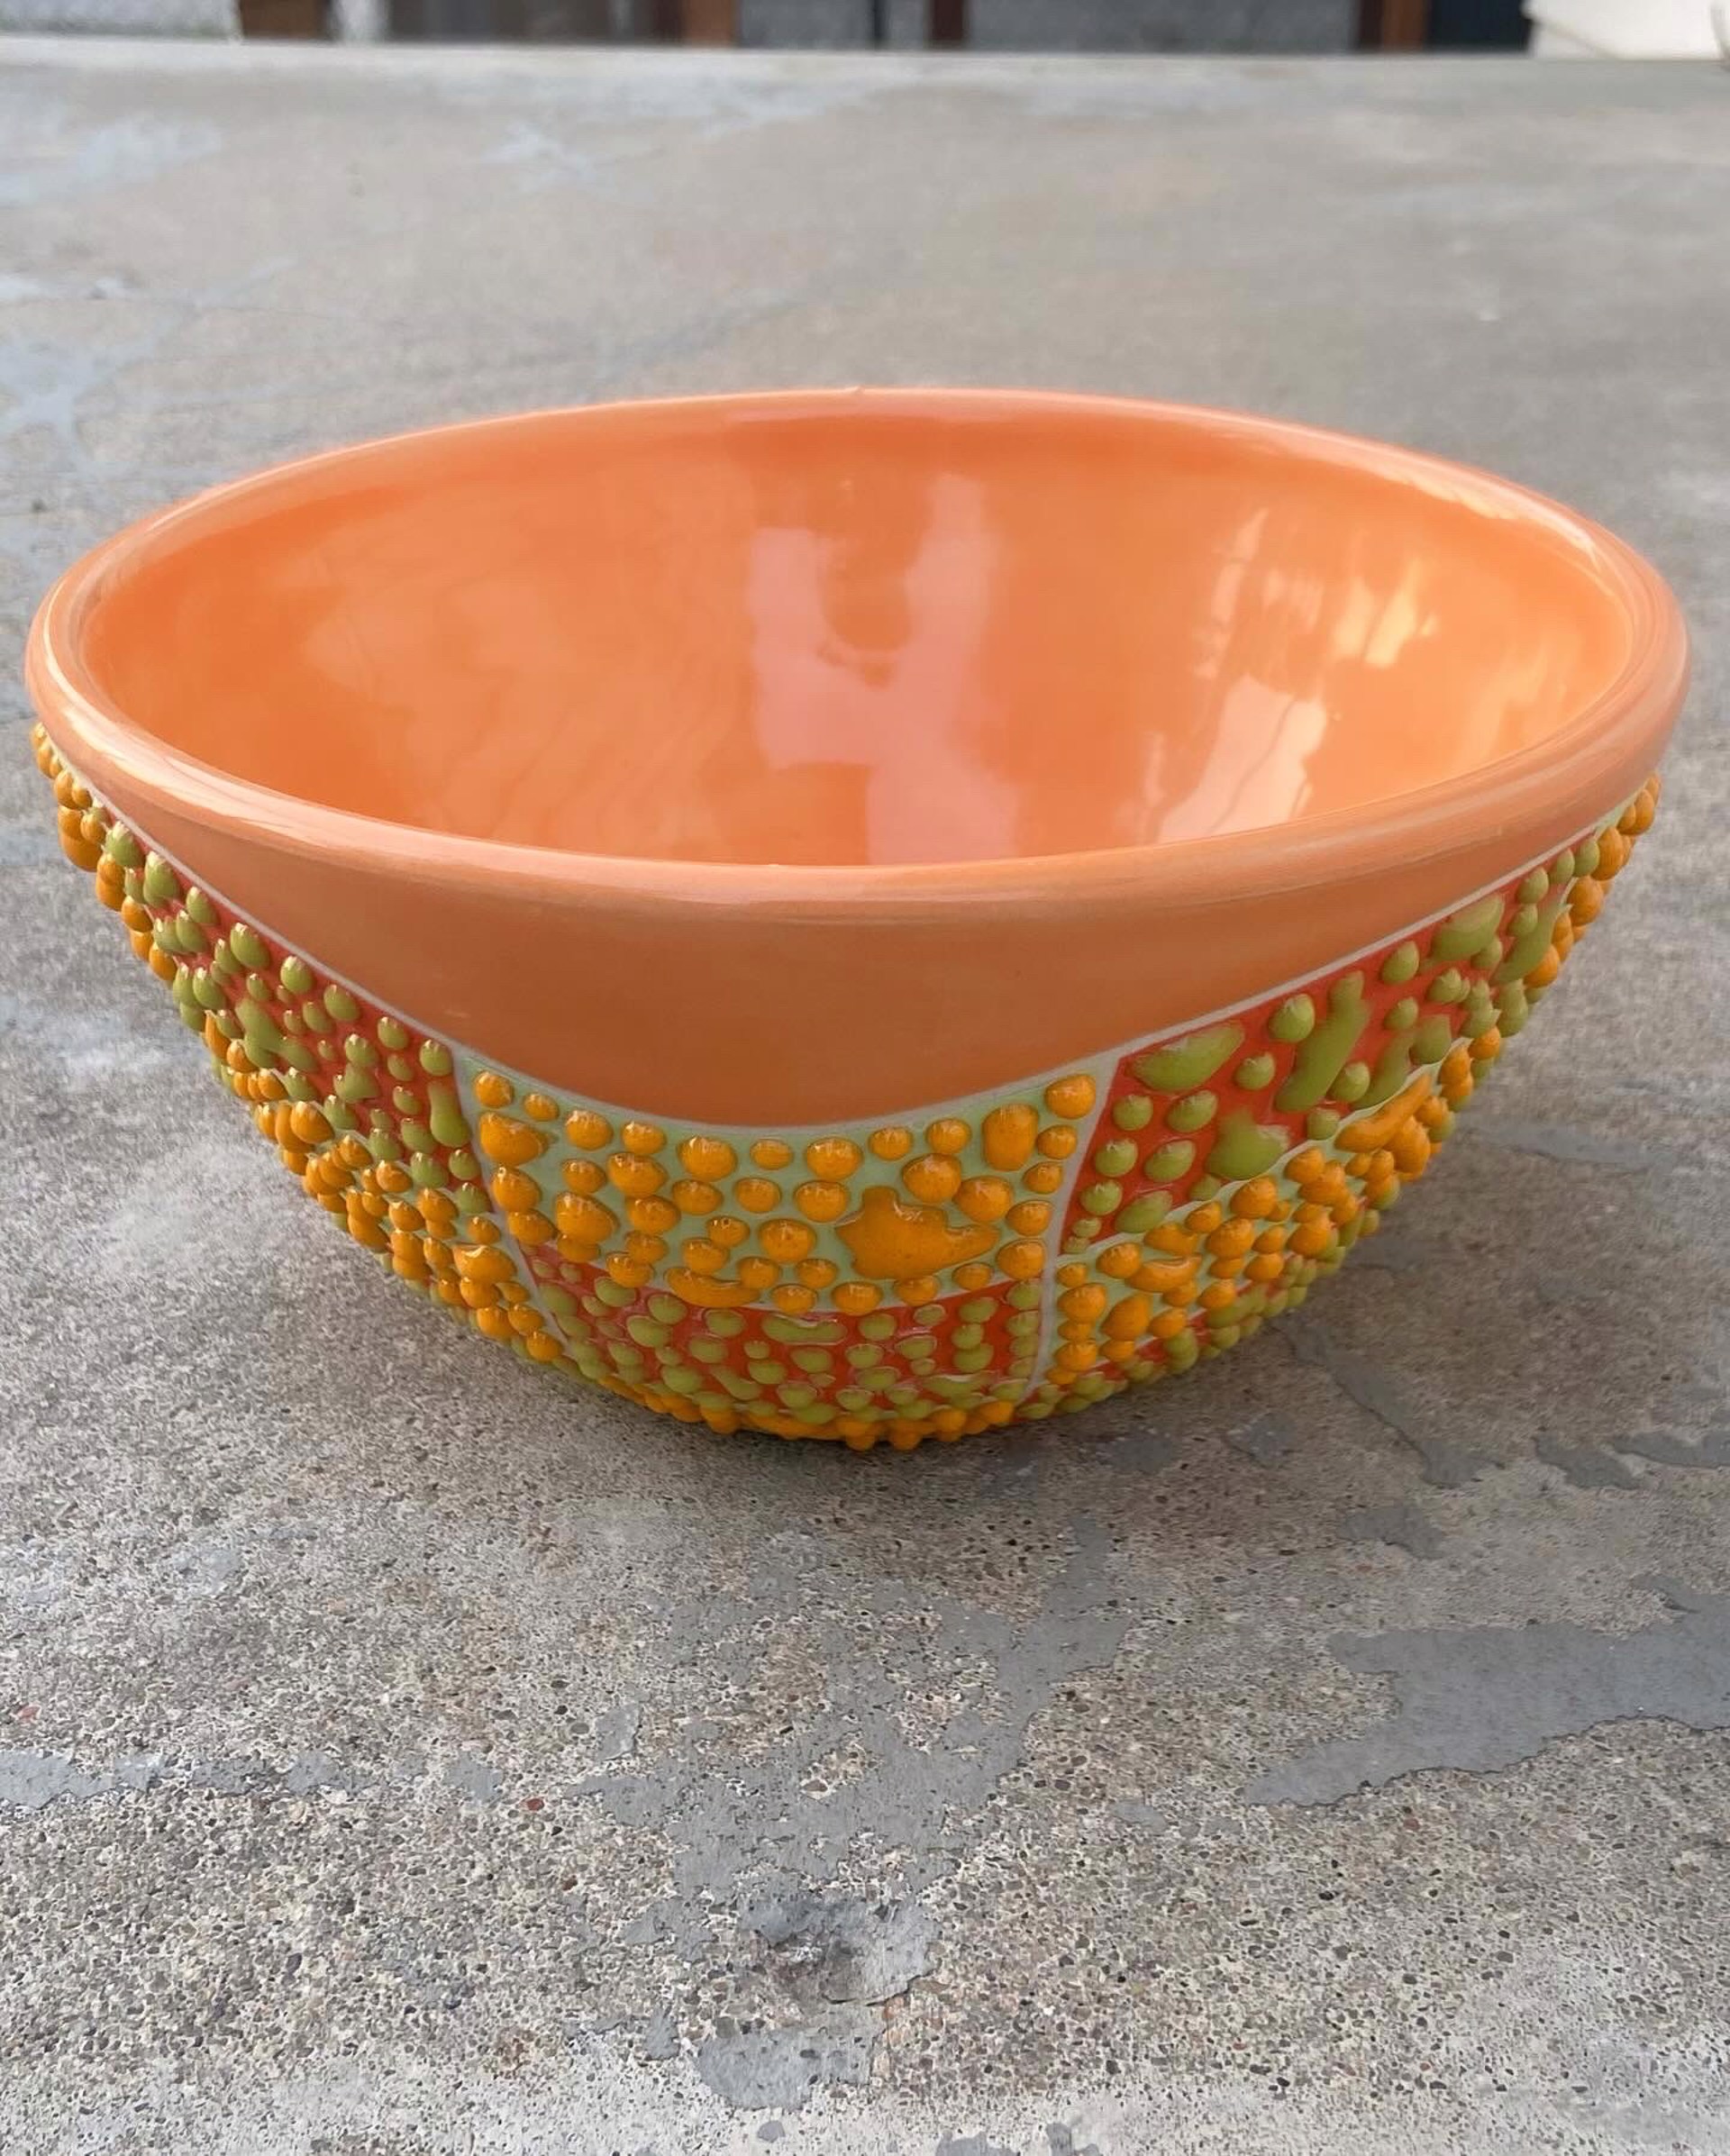 Checkered Gloopy Bowl 04 by Cassie Sullivan